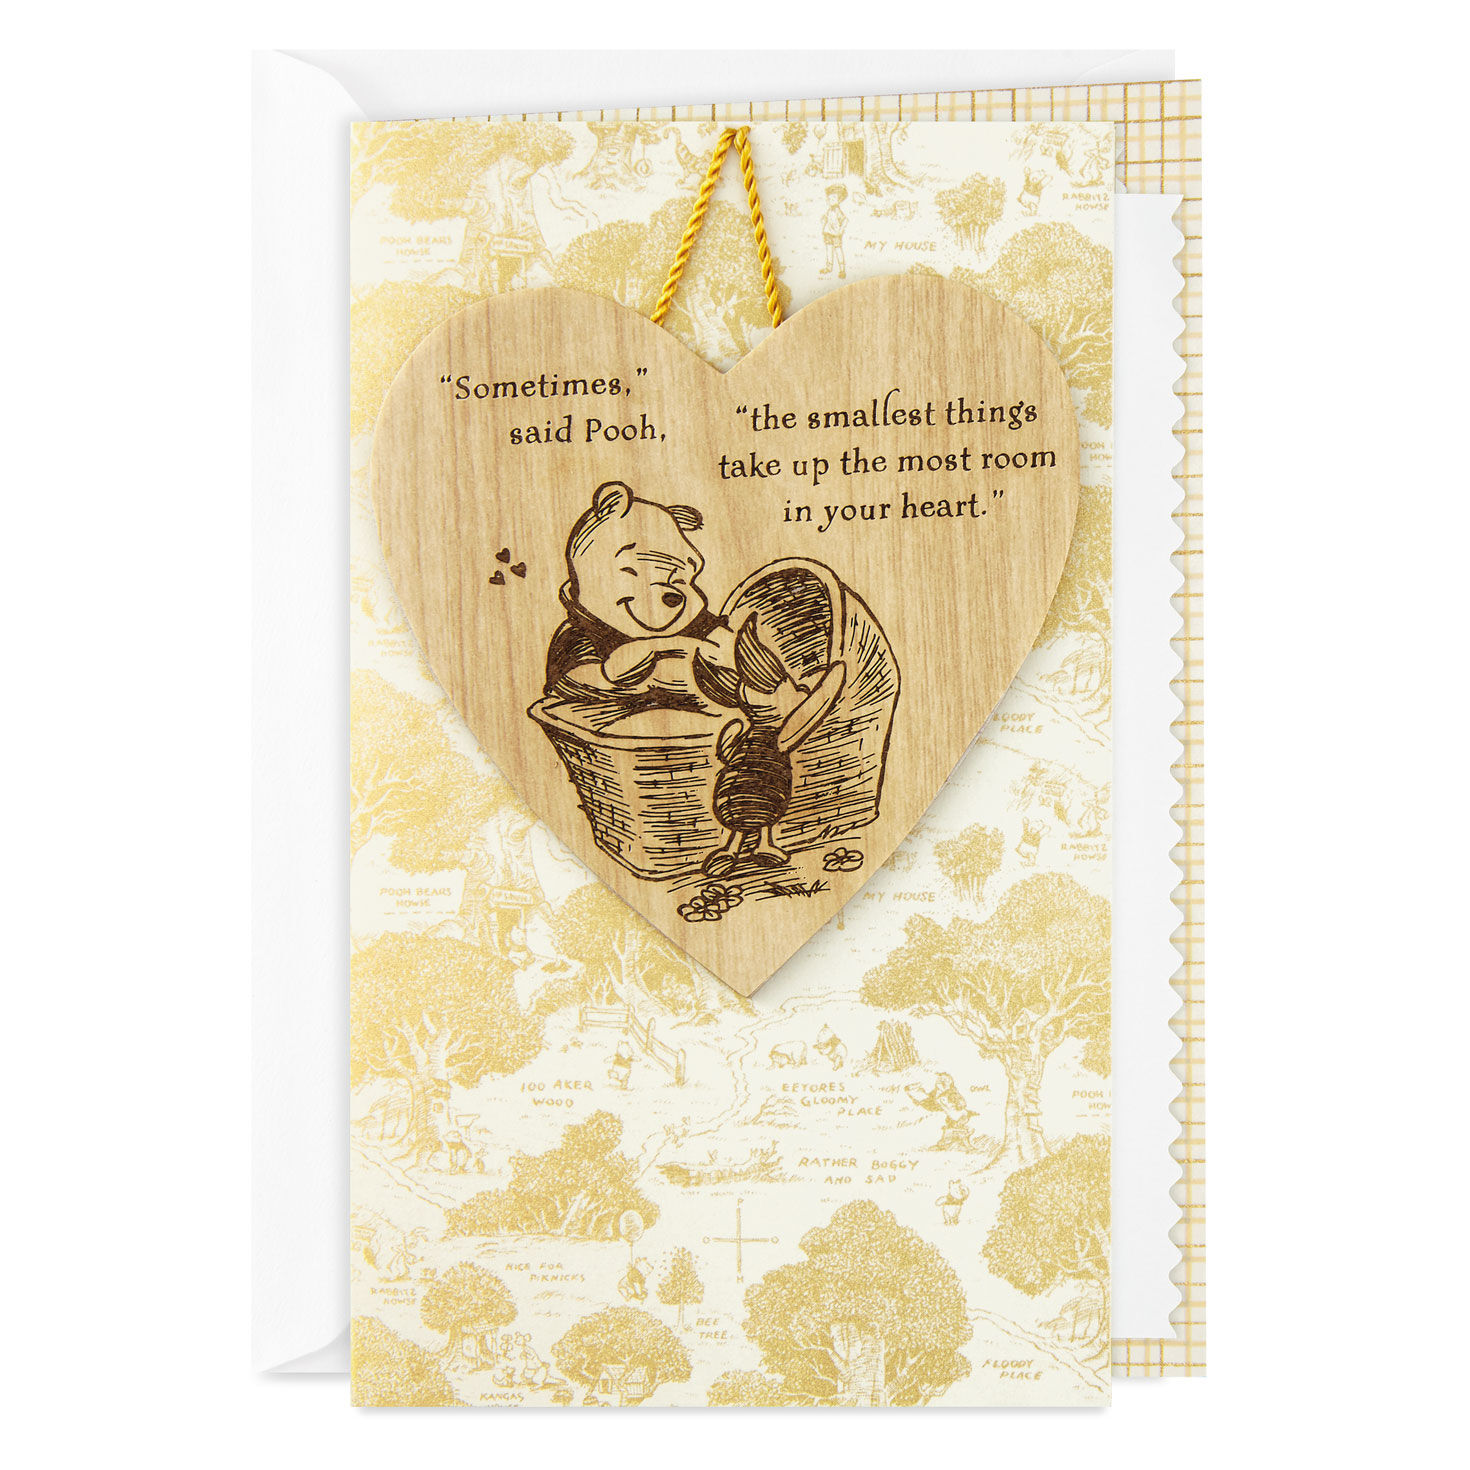 Bambi & Dumbo Congratulations New Baby Card Includes S Disney Winnie The Pooh 